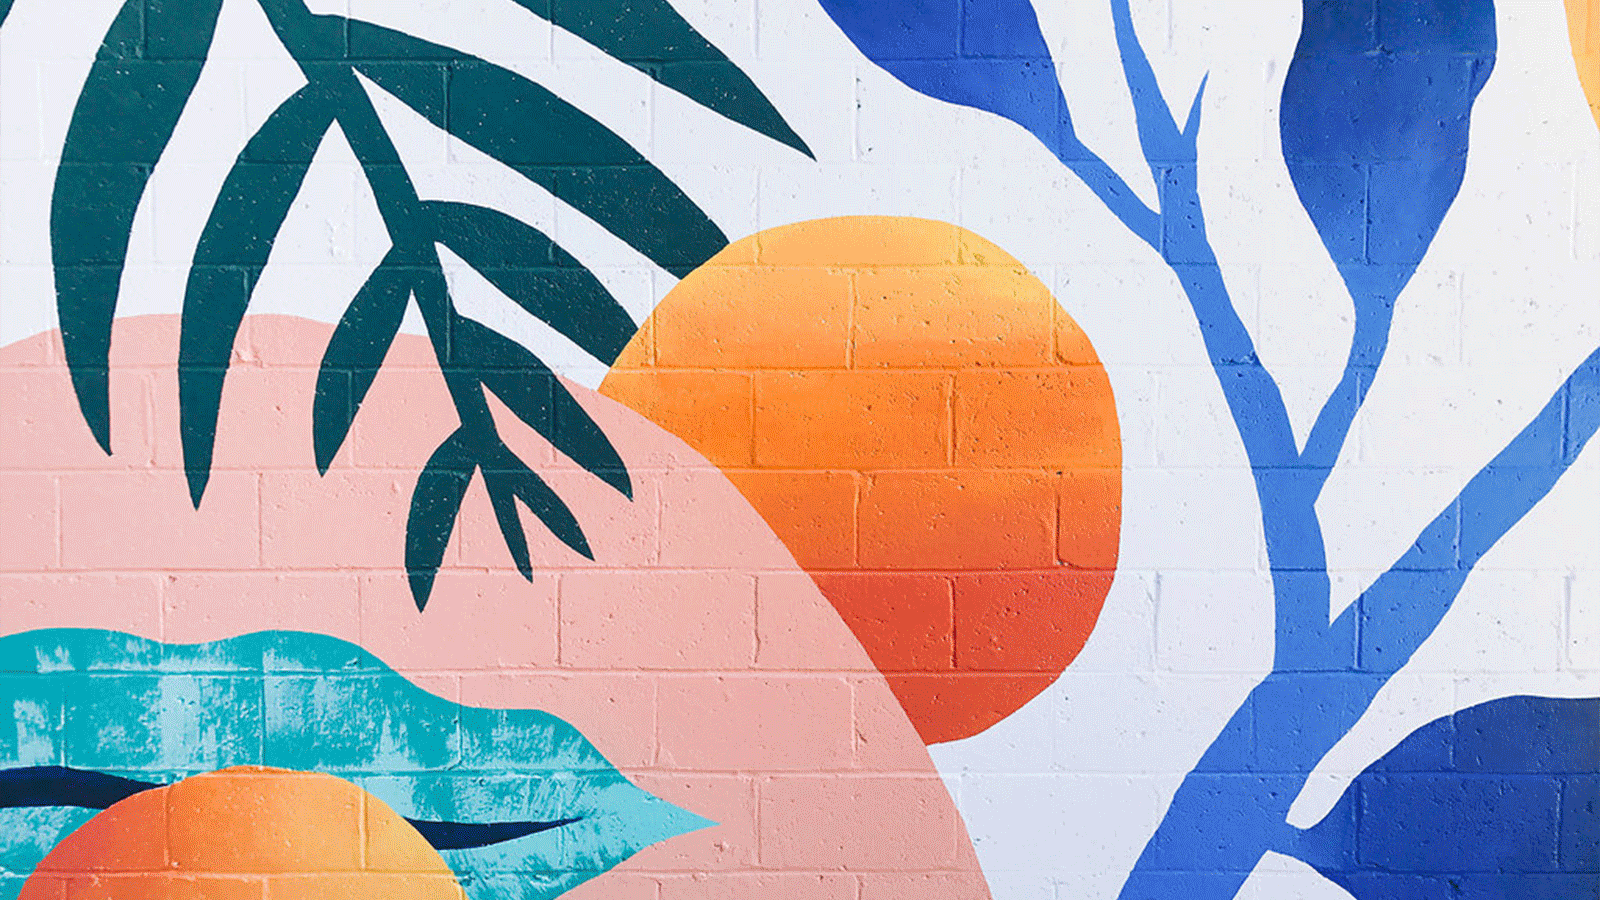 Animated images of mural designs done for Elizabeth Ave Station, Lewis Miller Design, Grandview Public Market, and Rust & Wax Record Shop in West Palm Beach, Florida.